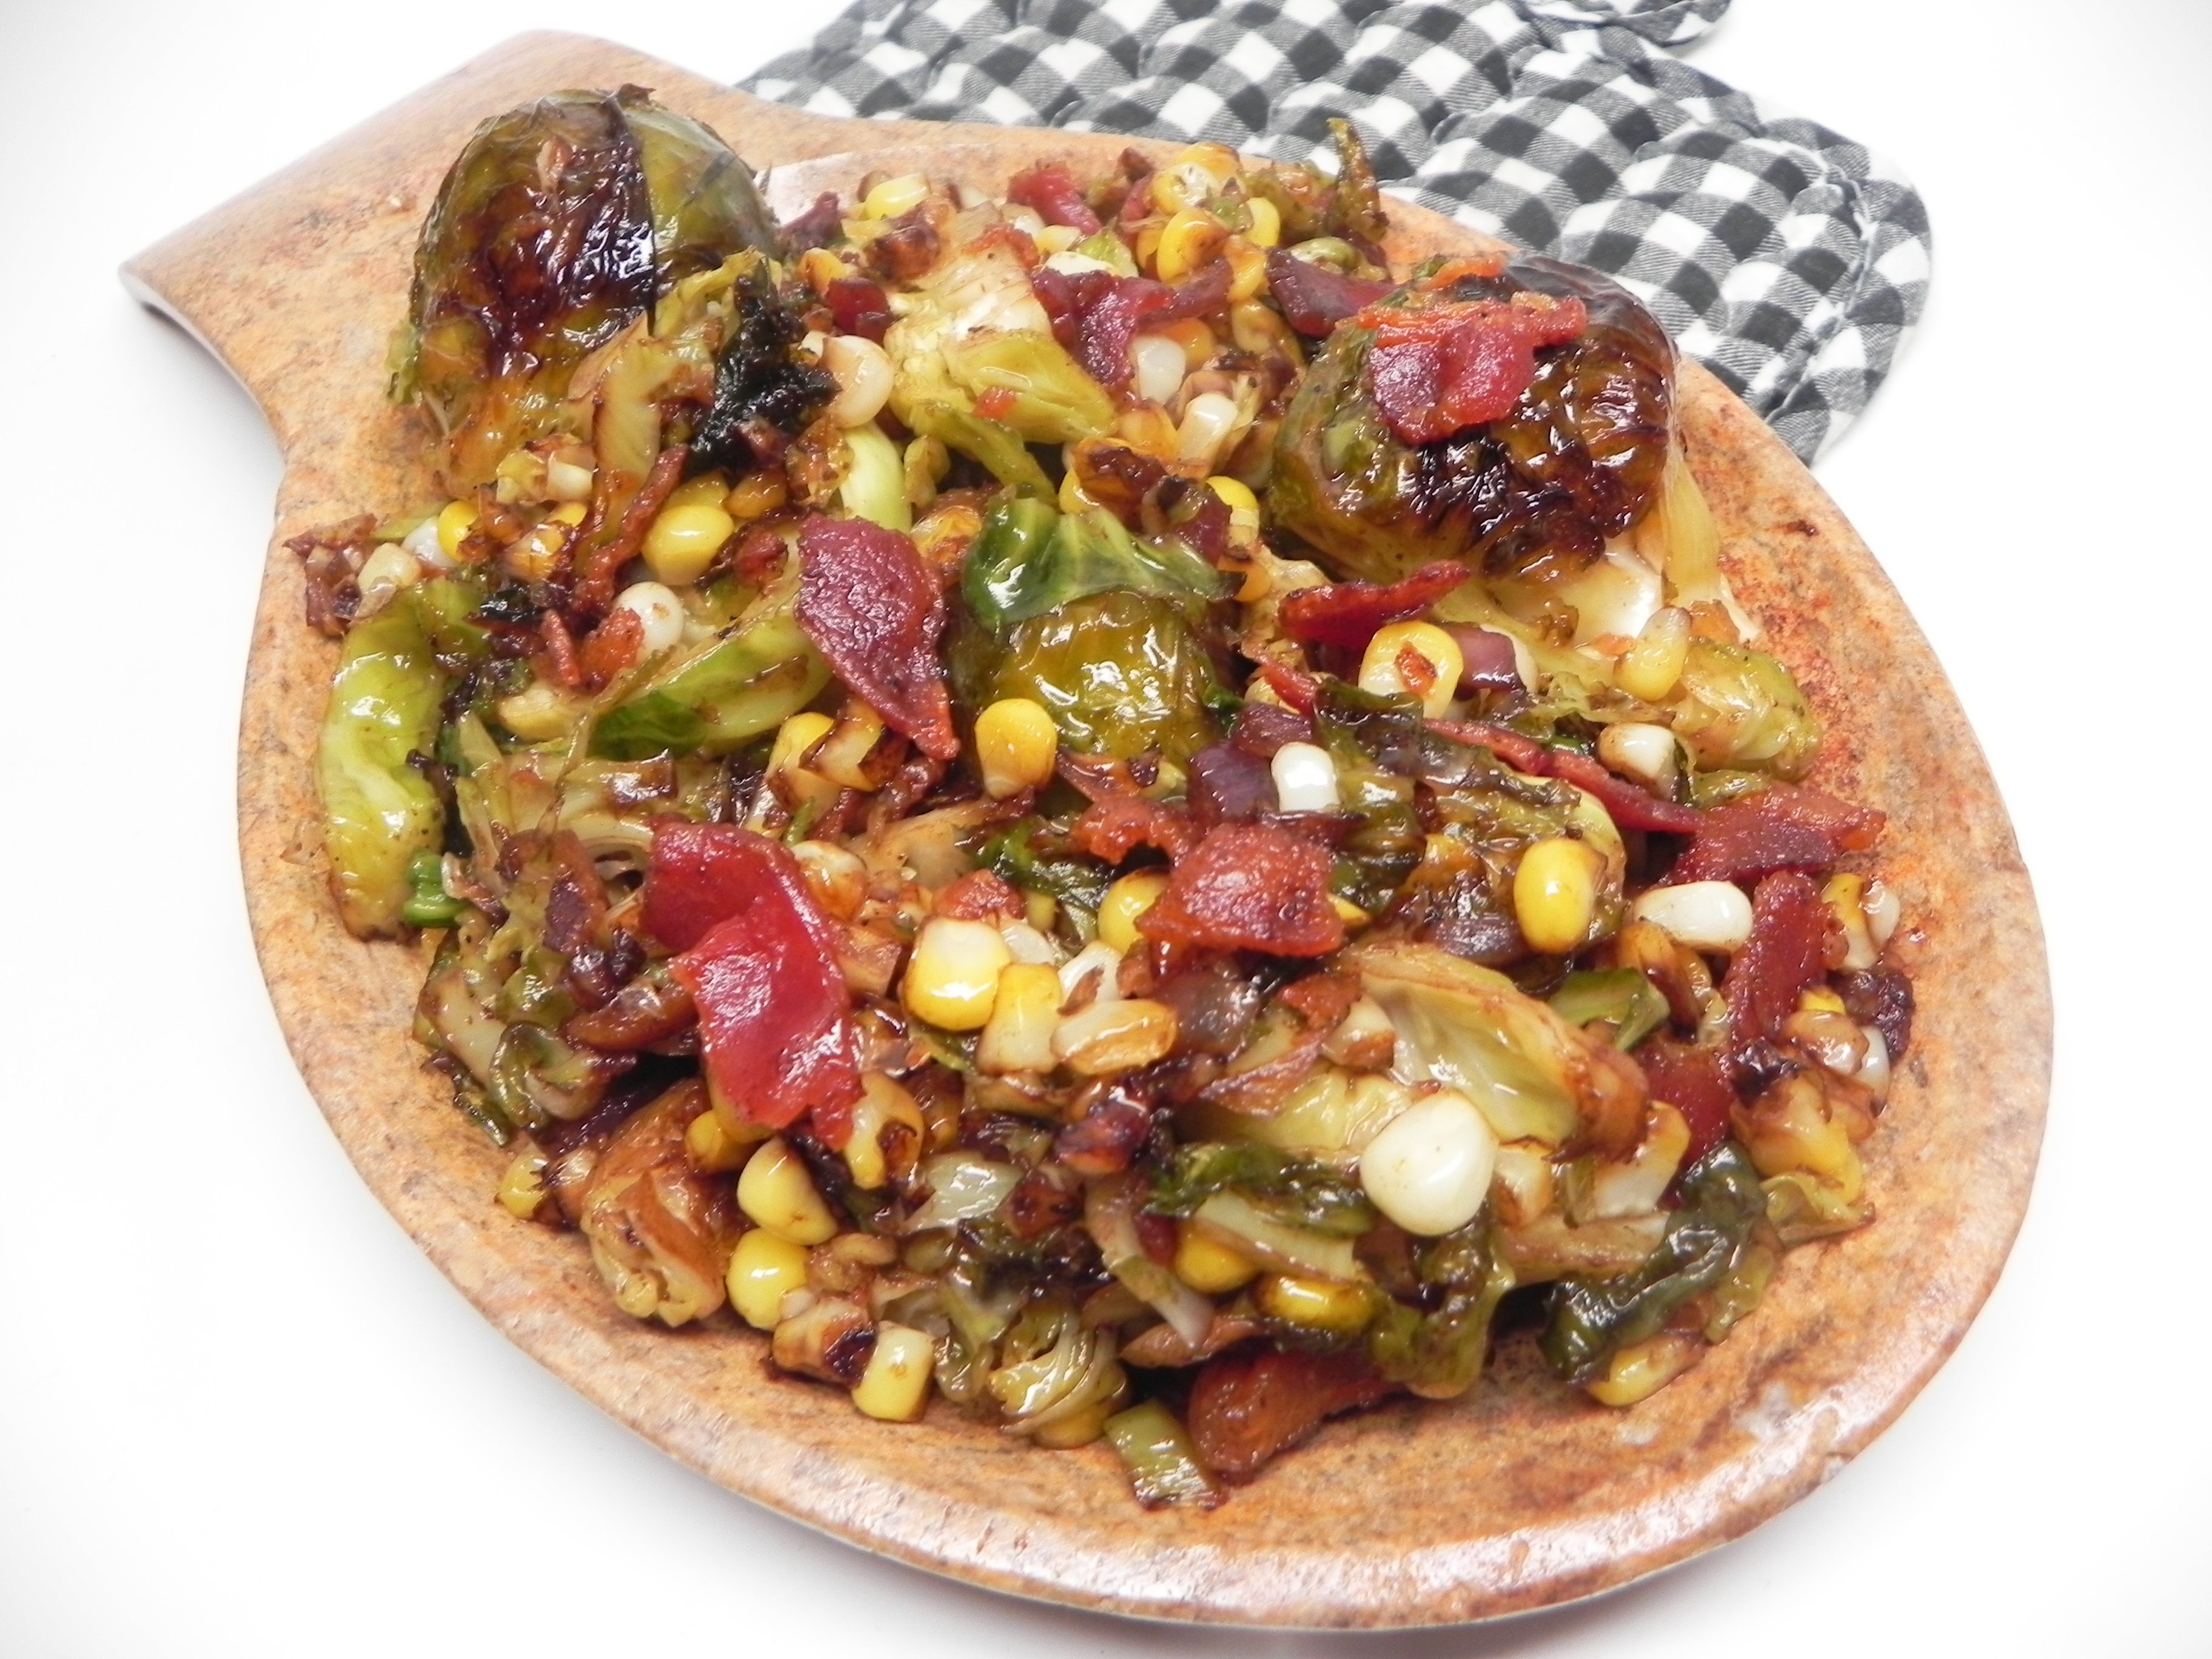 Roasted Brussels Sprouts and Corn Salad